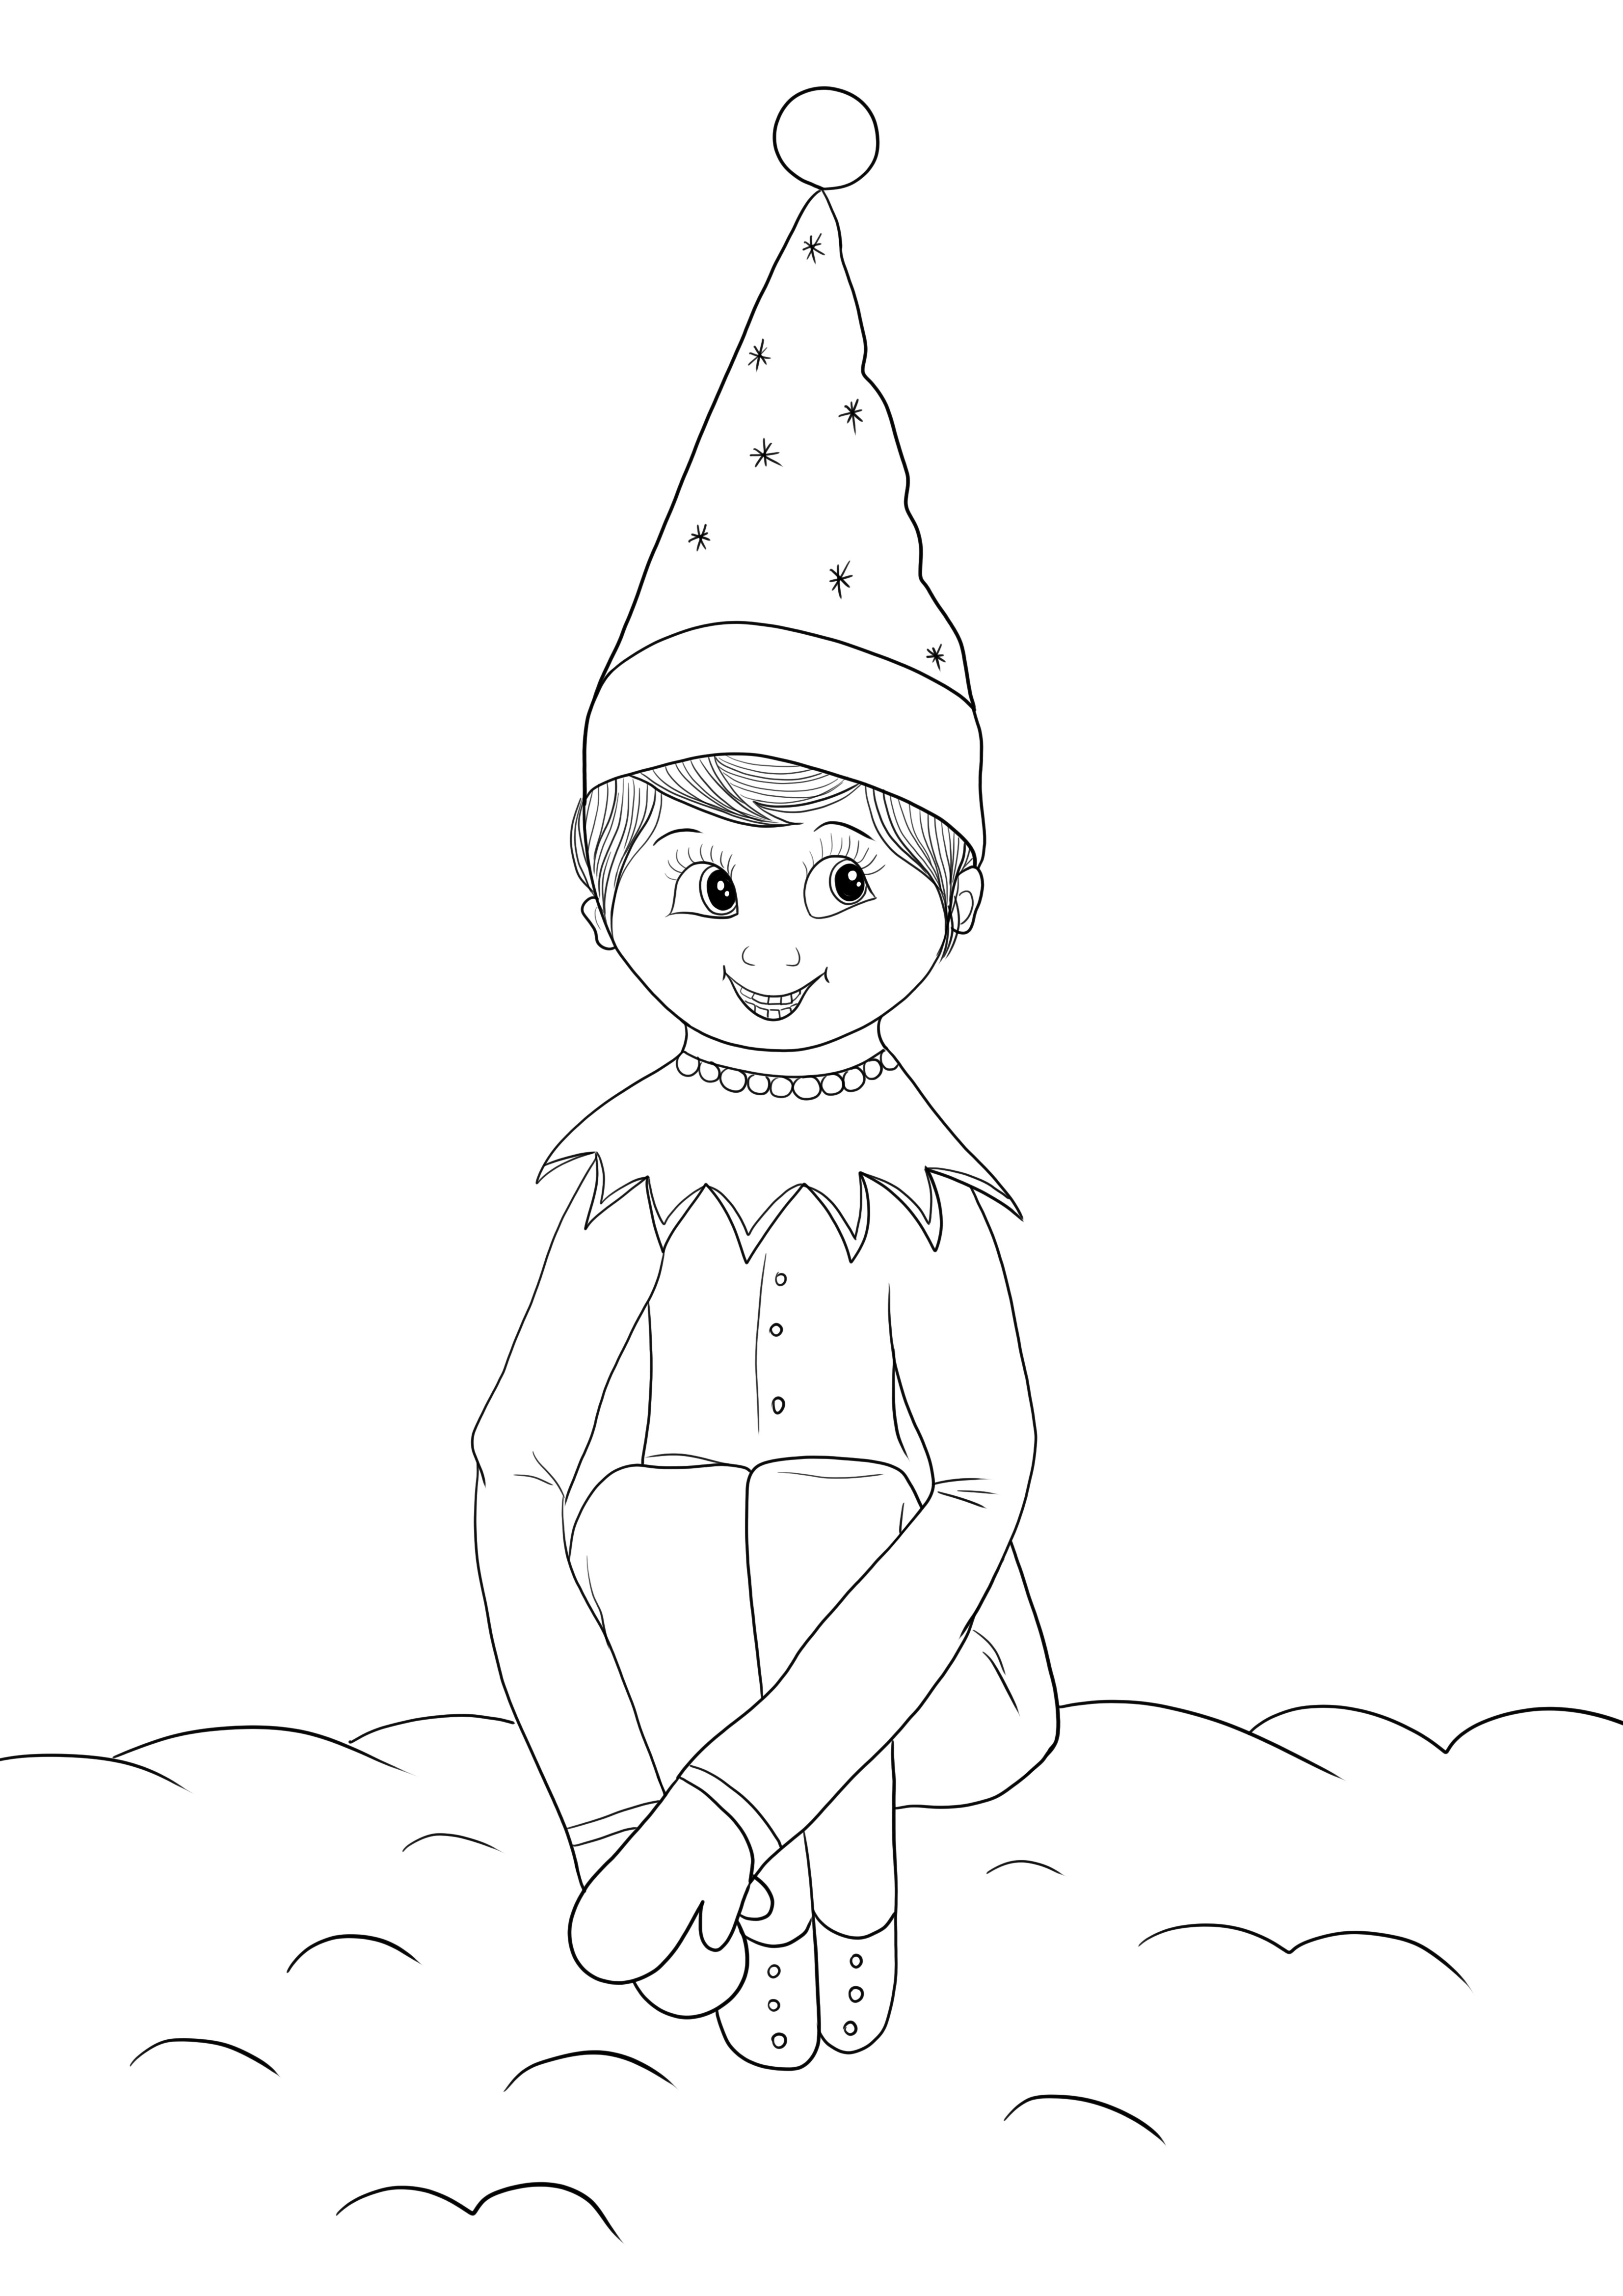 Elf is sitting on the shelf coloring sheet to print and color for free